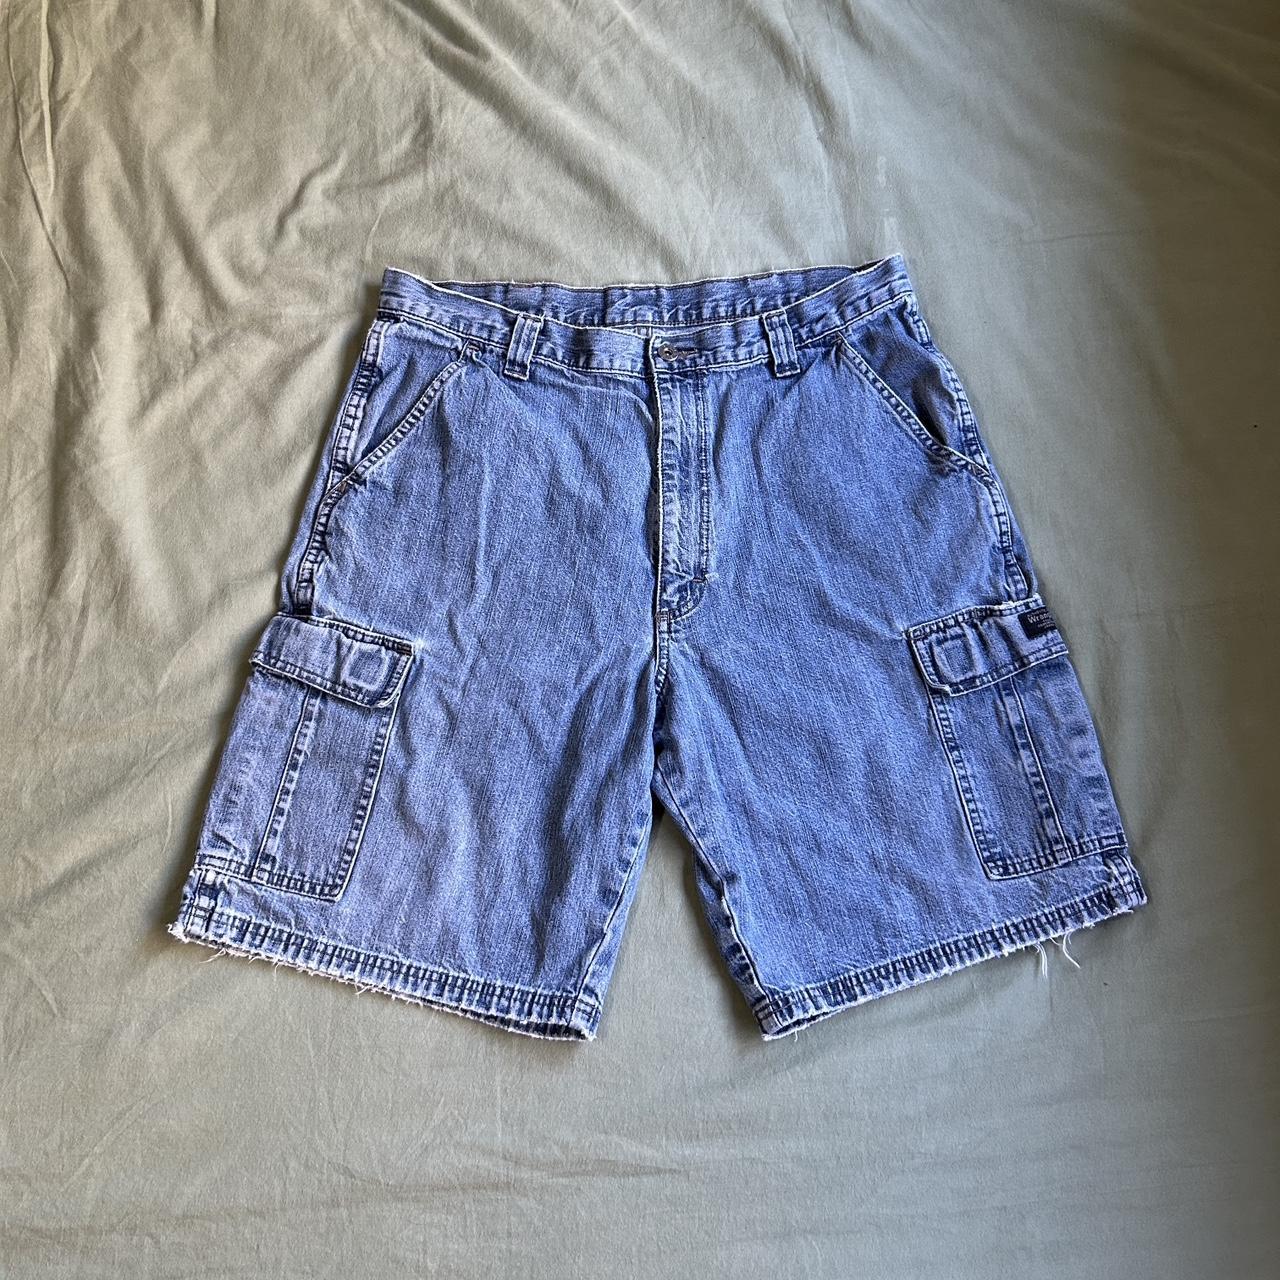 Wrangler faded cargo Jean shorts size 34 with 9inch... - Depop